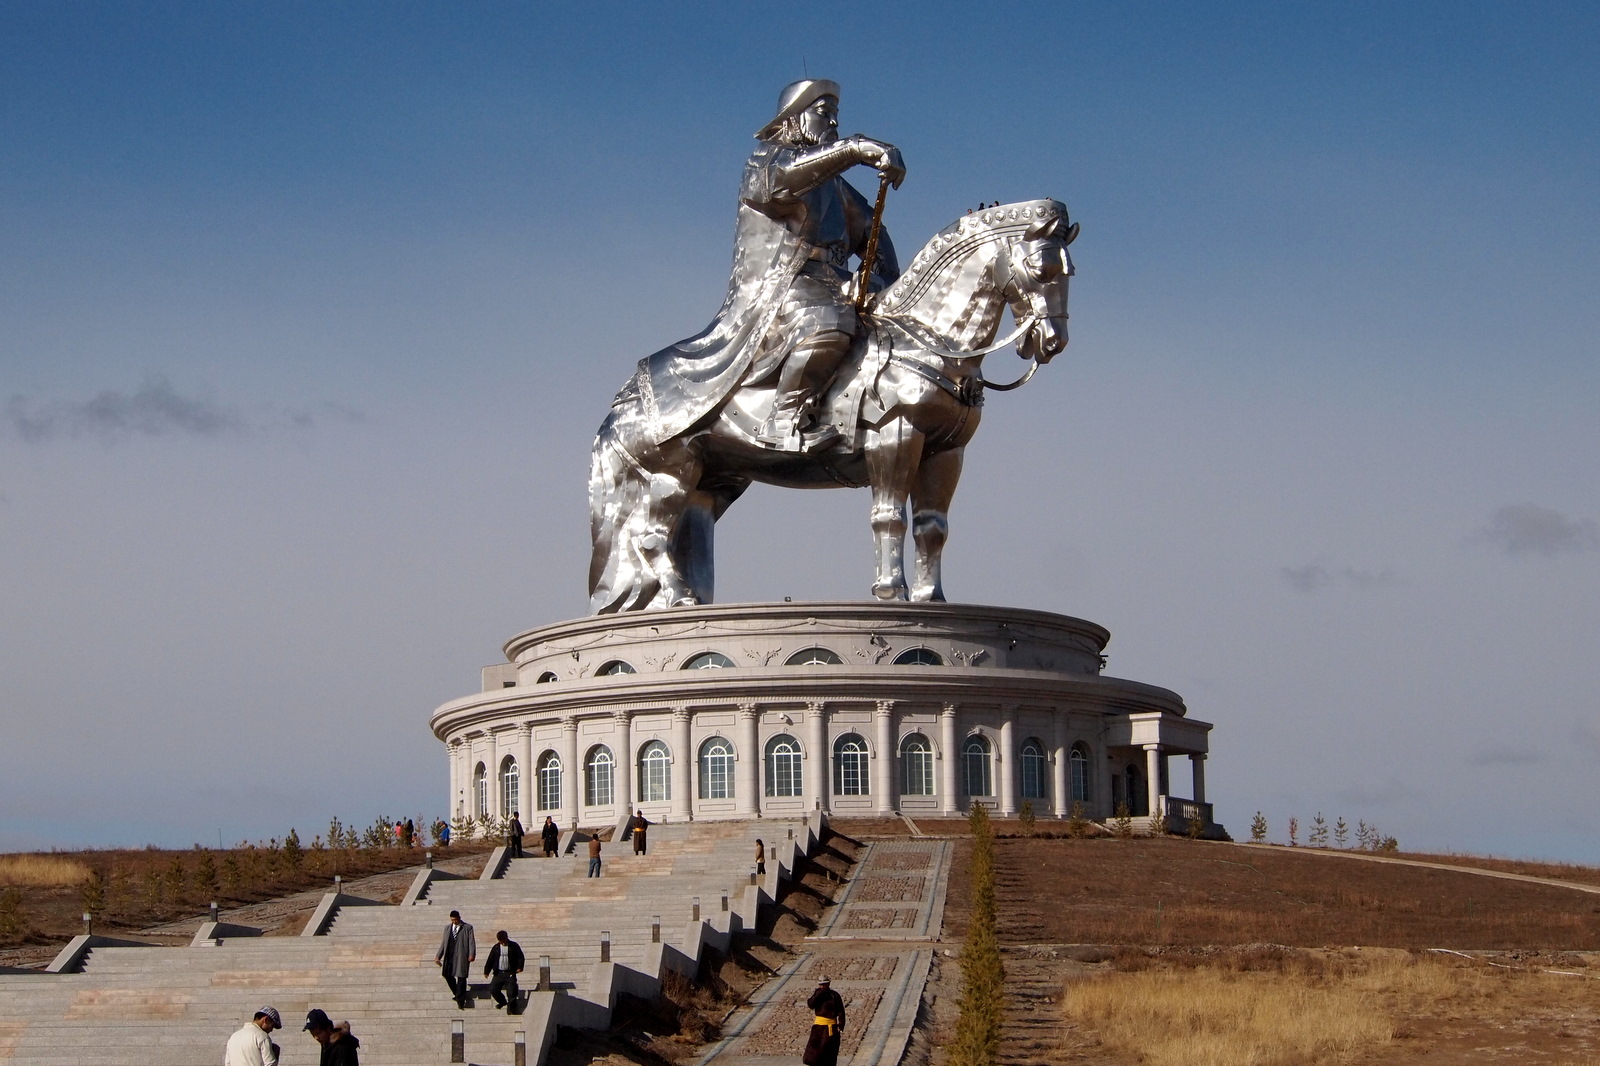 &#91;PIC&#93; Patung Besi &#91;Horse statue of Genghis Khan&#93;